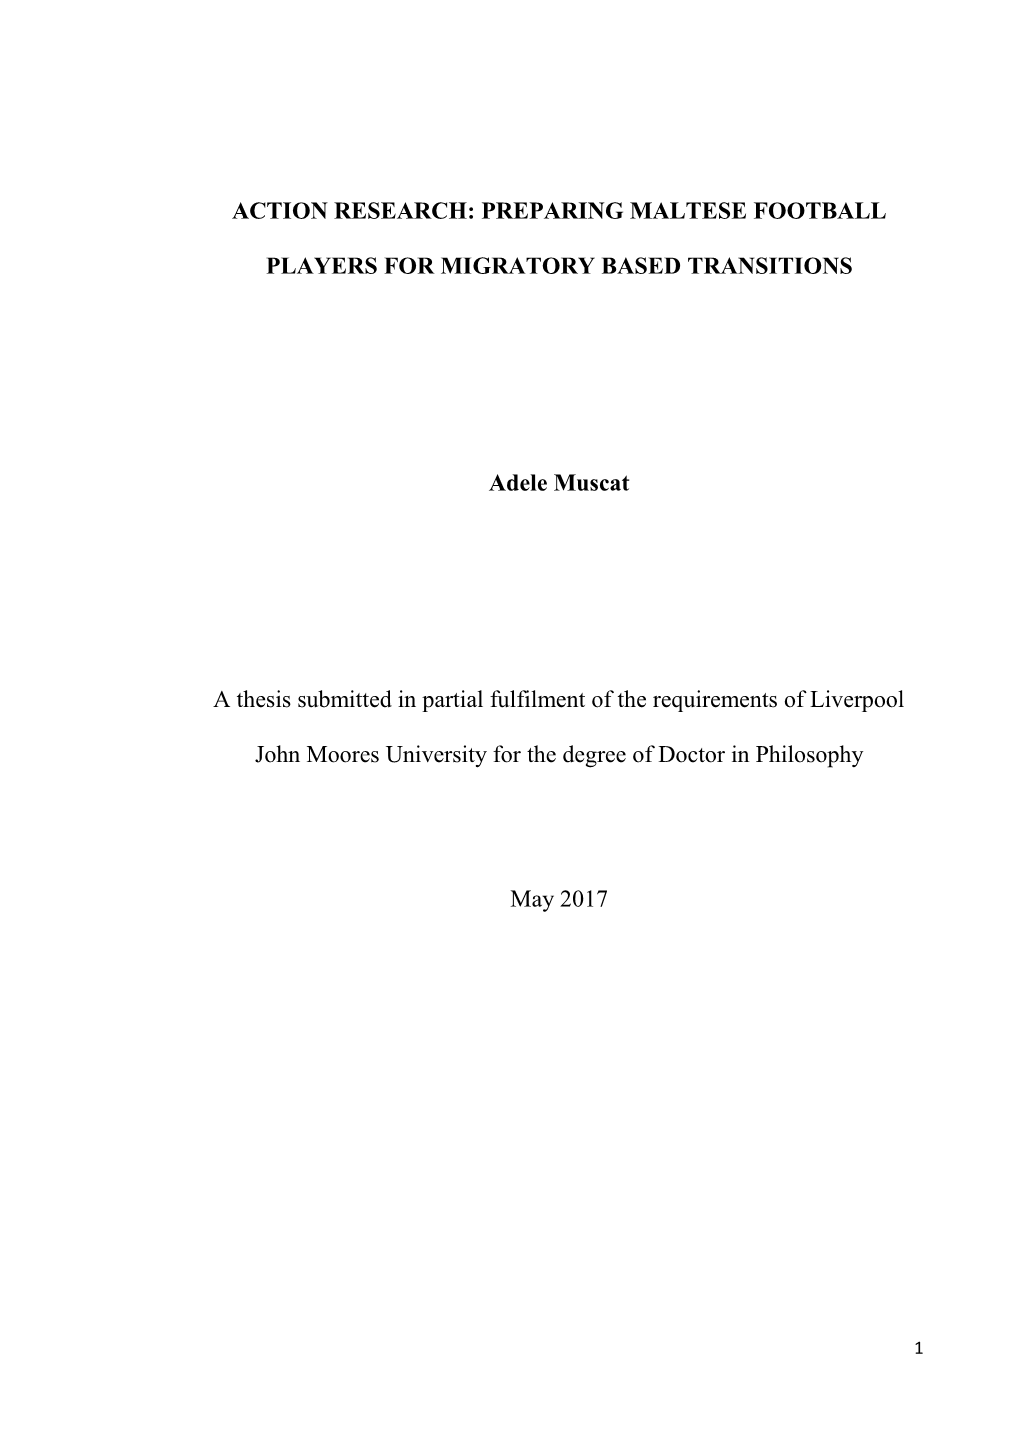 ACTION RESEARCH: PREPARING MALTESE FOOTBALL PLAYERS for MIGRATORY BASED TRANSITIONS Adele Muscat a Thesis Submitted in Partial F